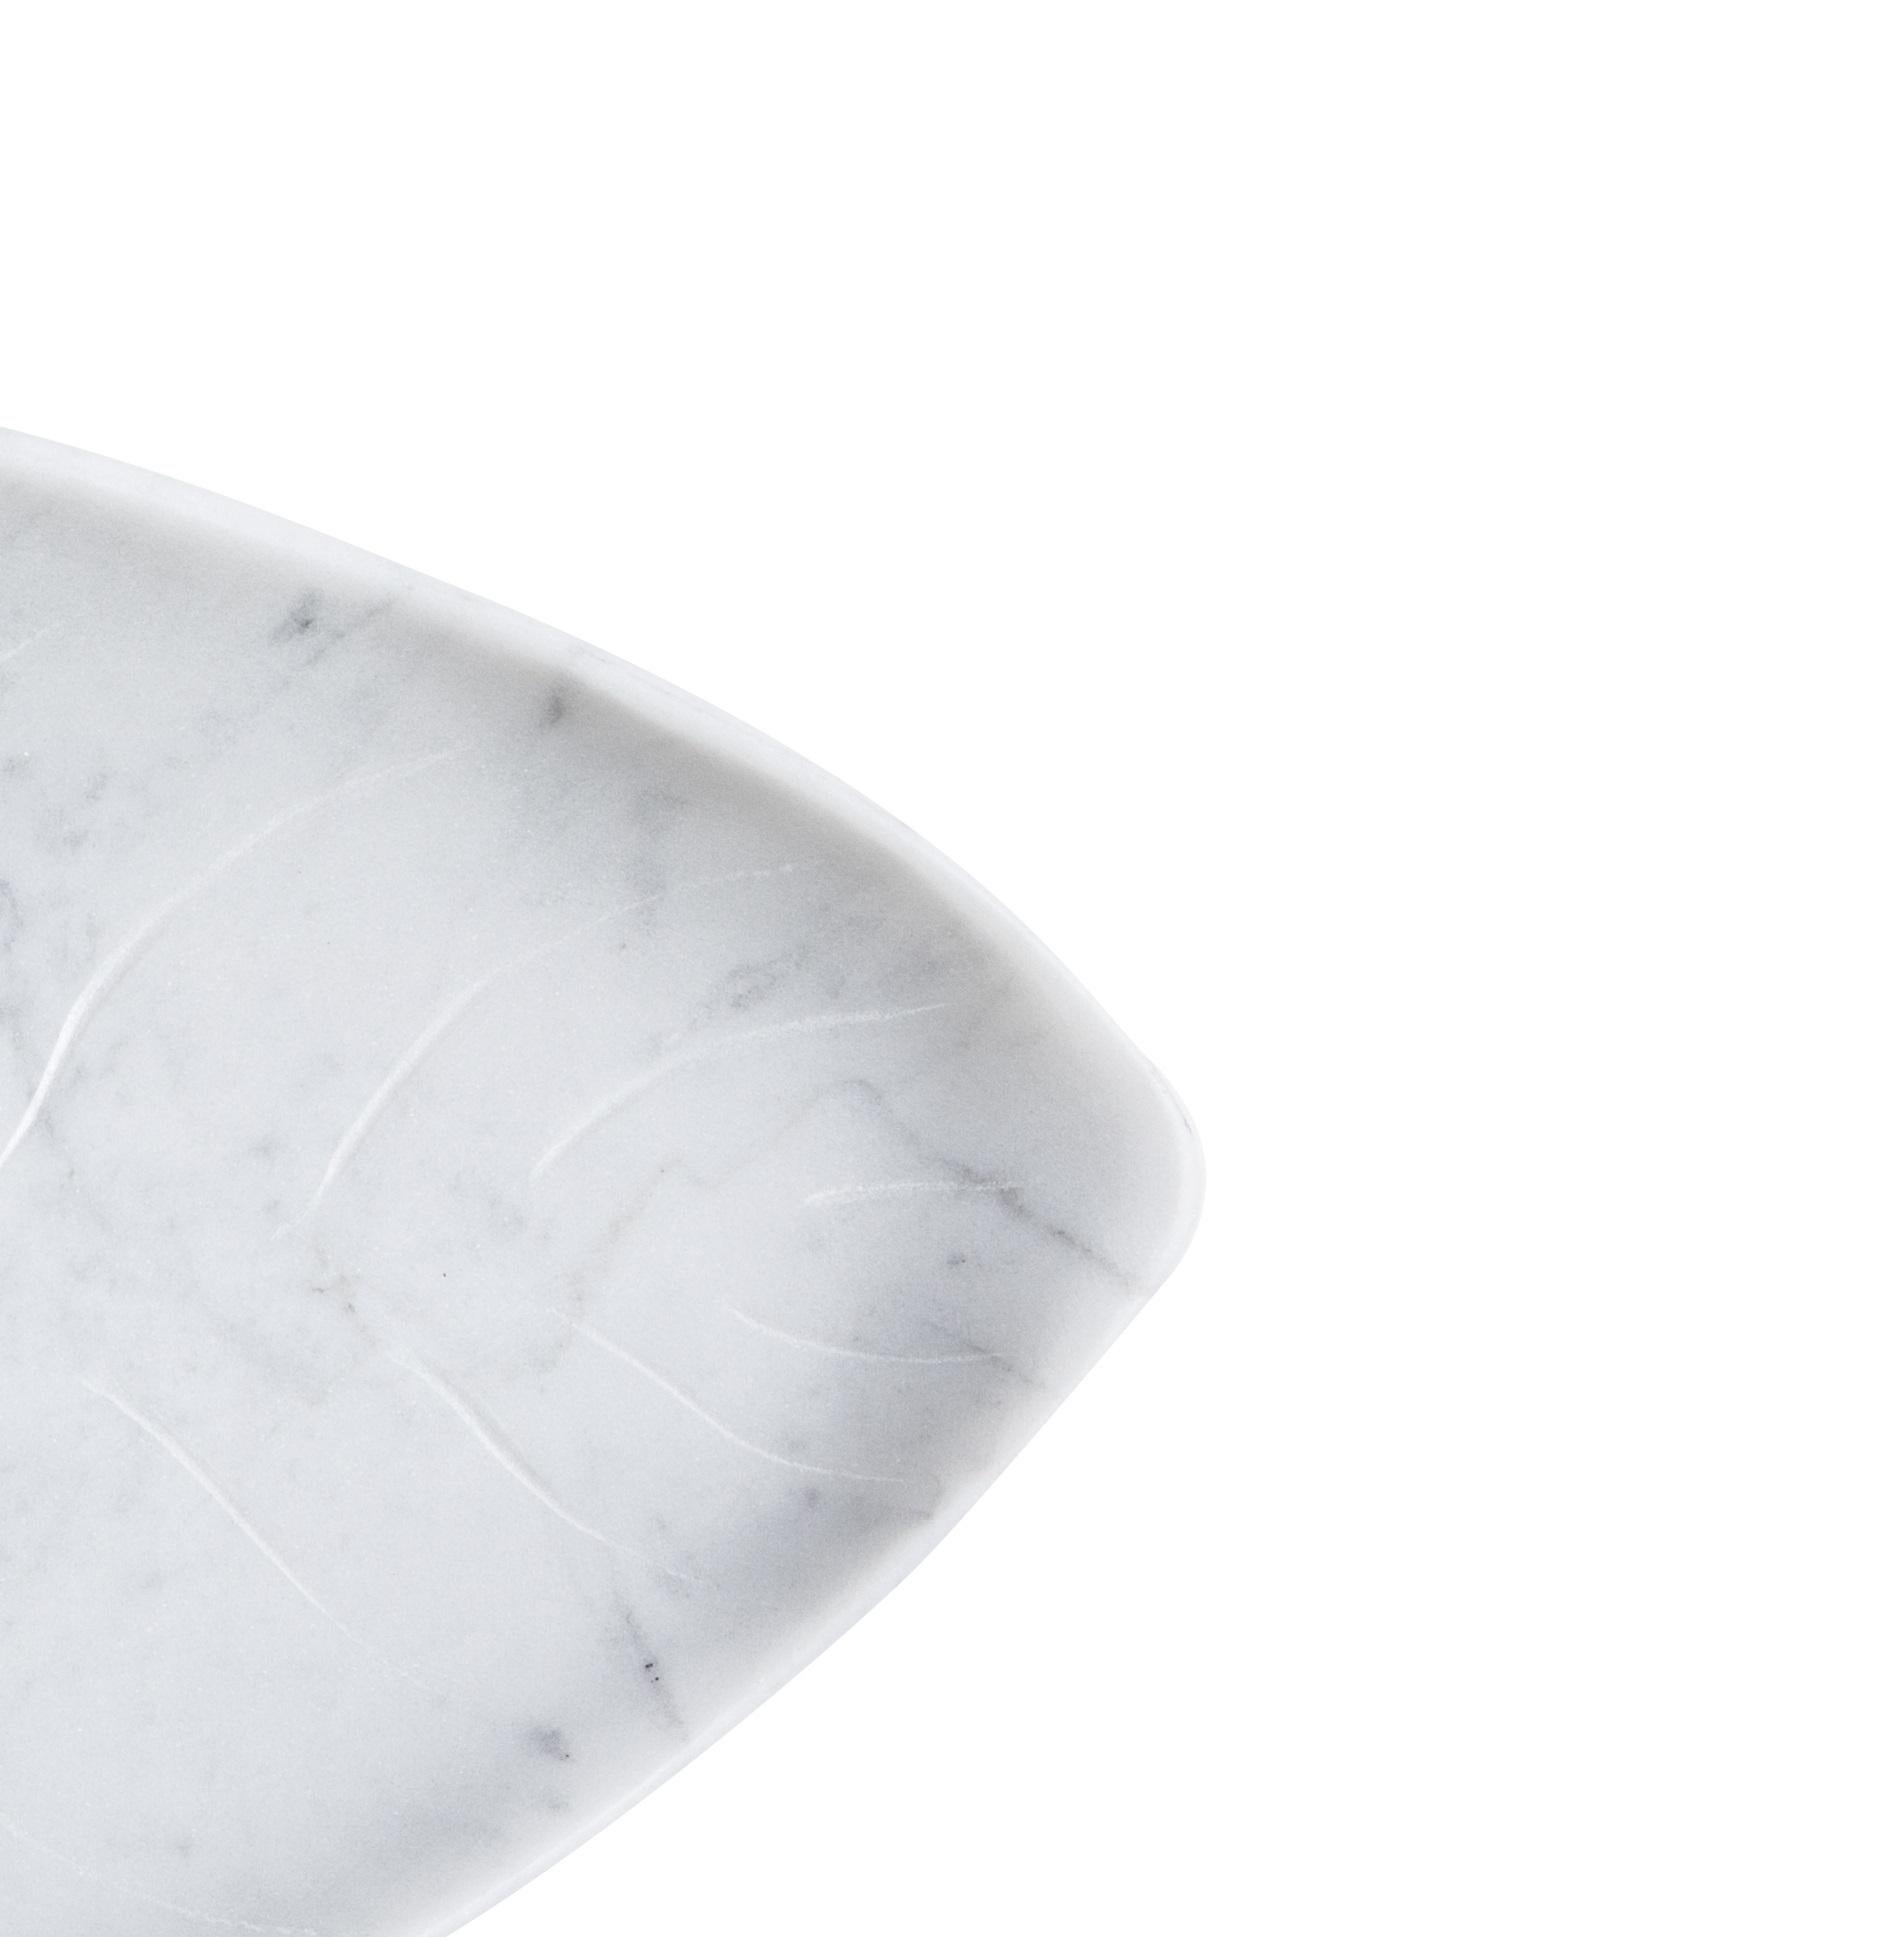 Big handcraft white Carrara marble plate, with the shape of a leaf, that is perfect to beautifully present food or can be used as a centrepiece. 

Each piece is in a way unique (every marble block is different in veins and shades) and handmade by